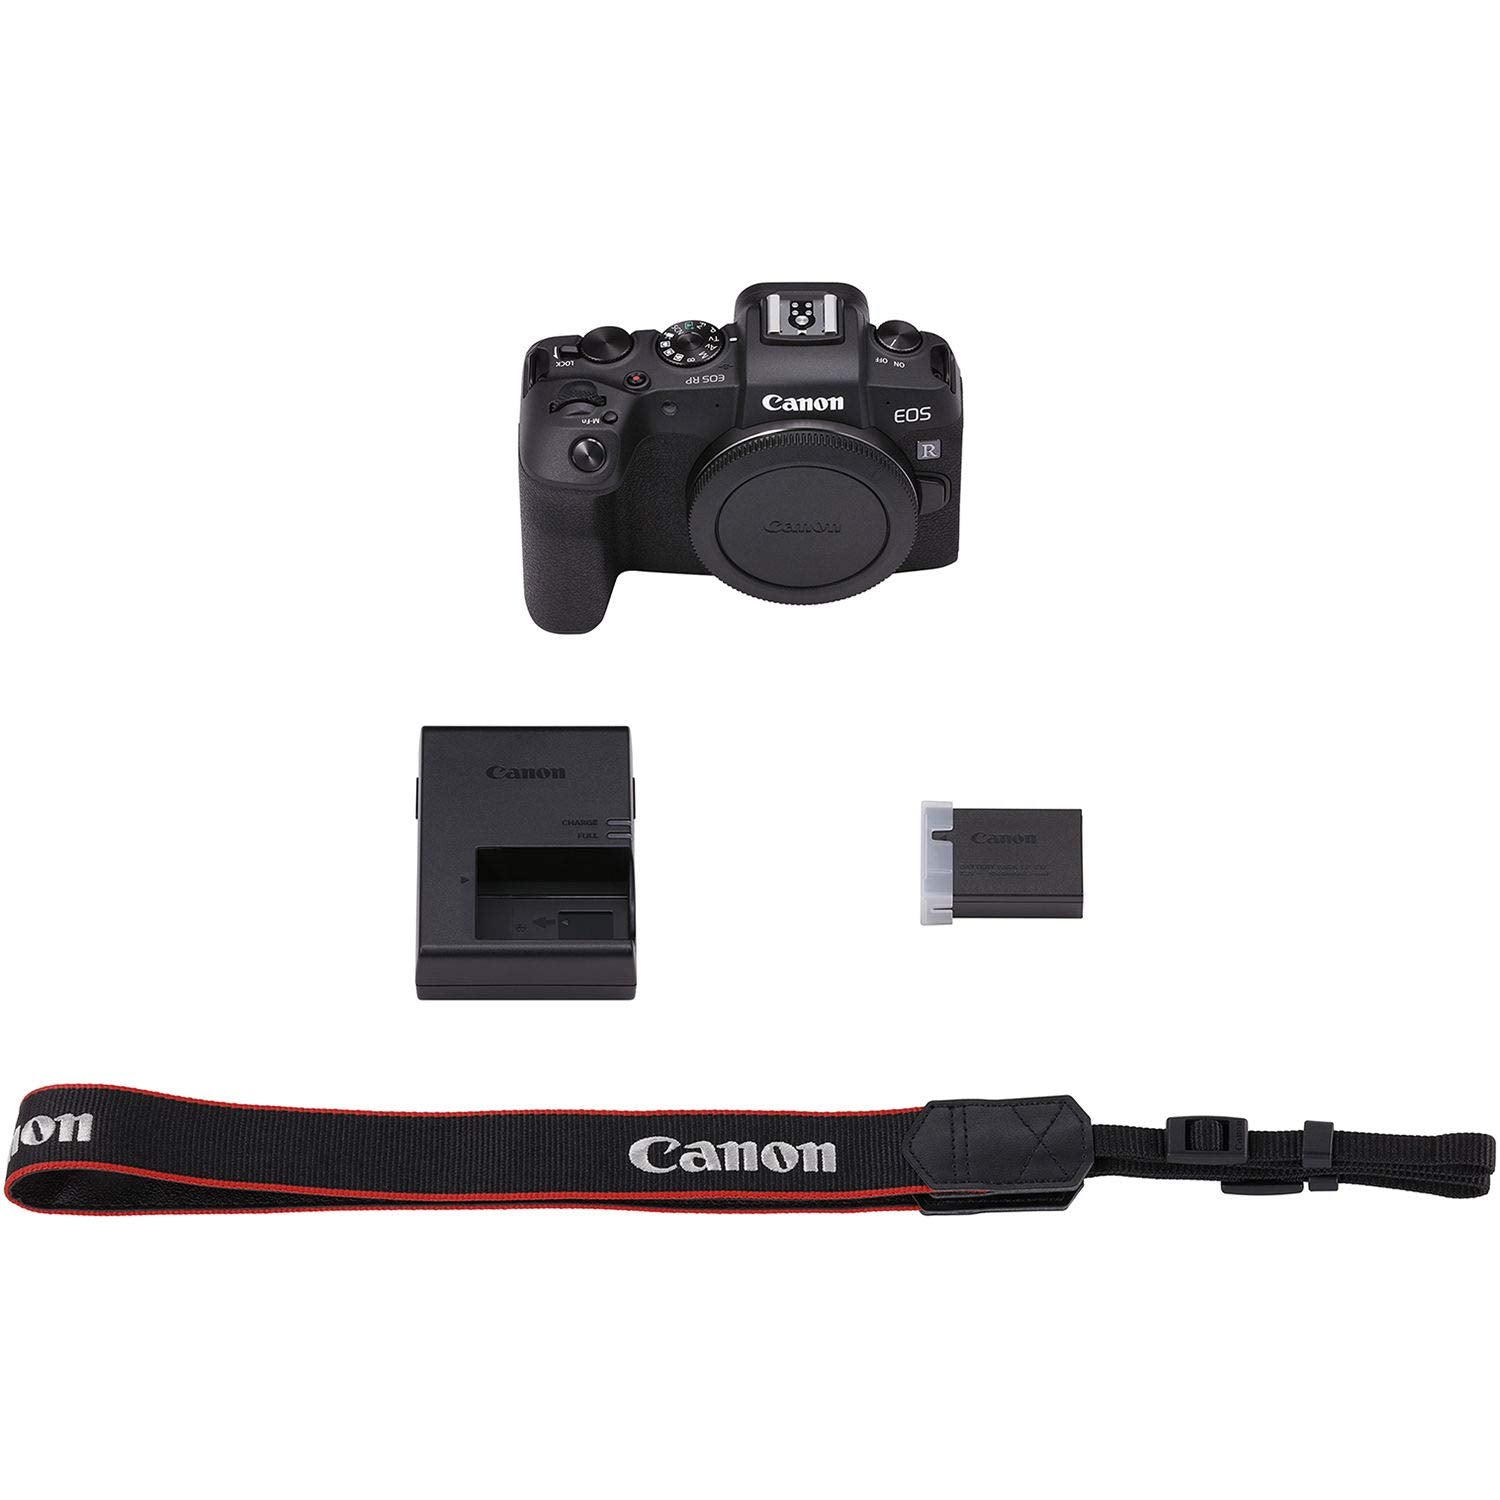 Canon EOS RP Mirrorless Digital Camera (Body Only) - Includes - Cleaning Kit and 1-Year Extended Warranty Bundle